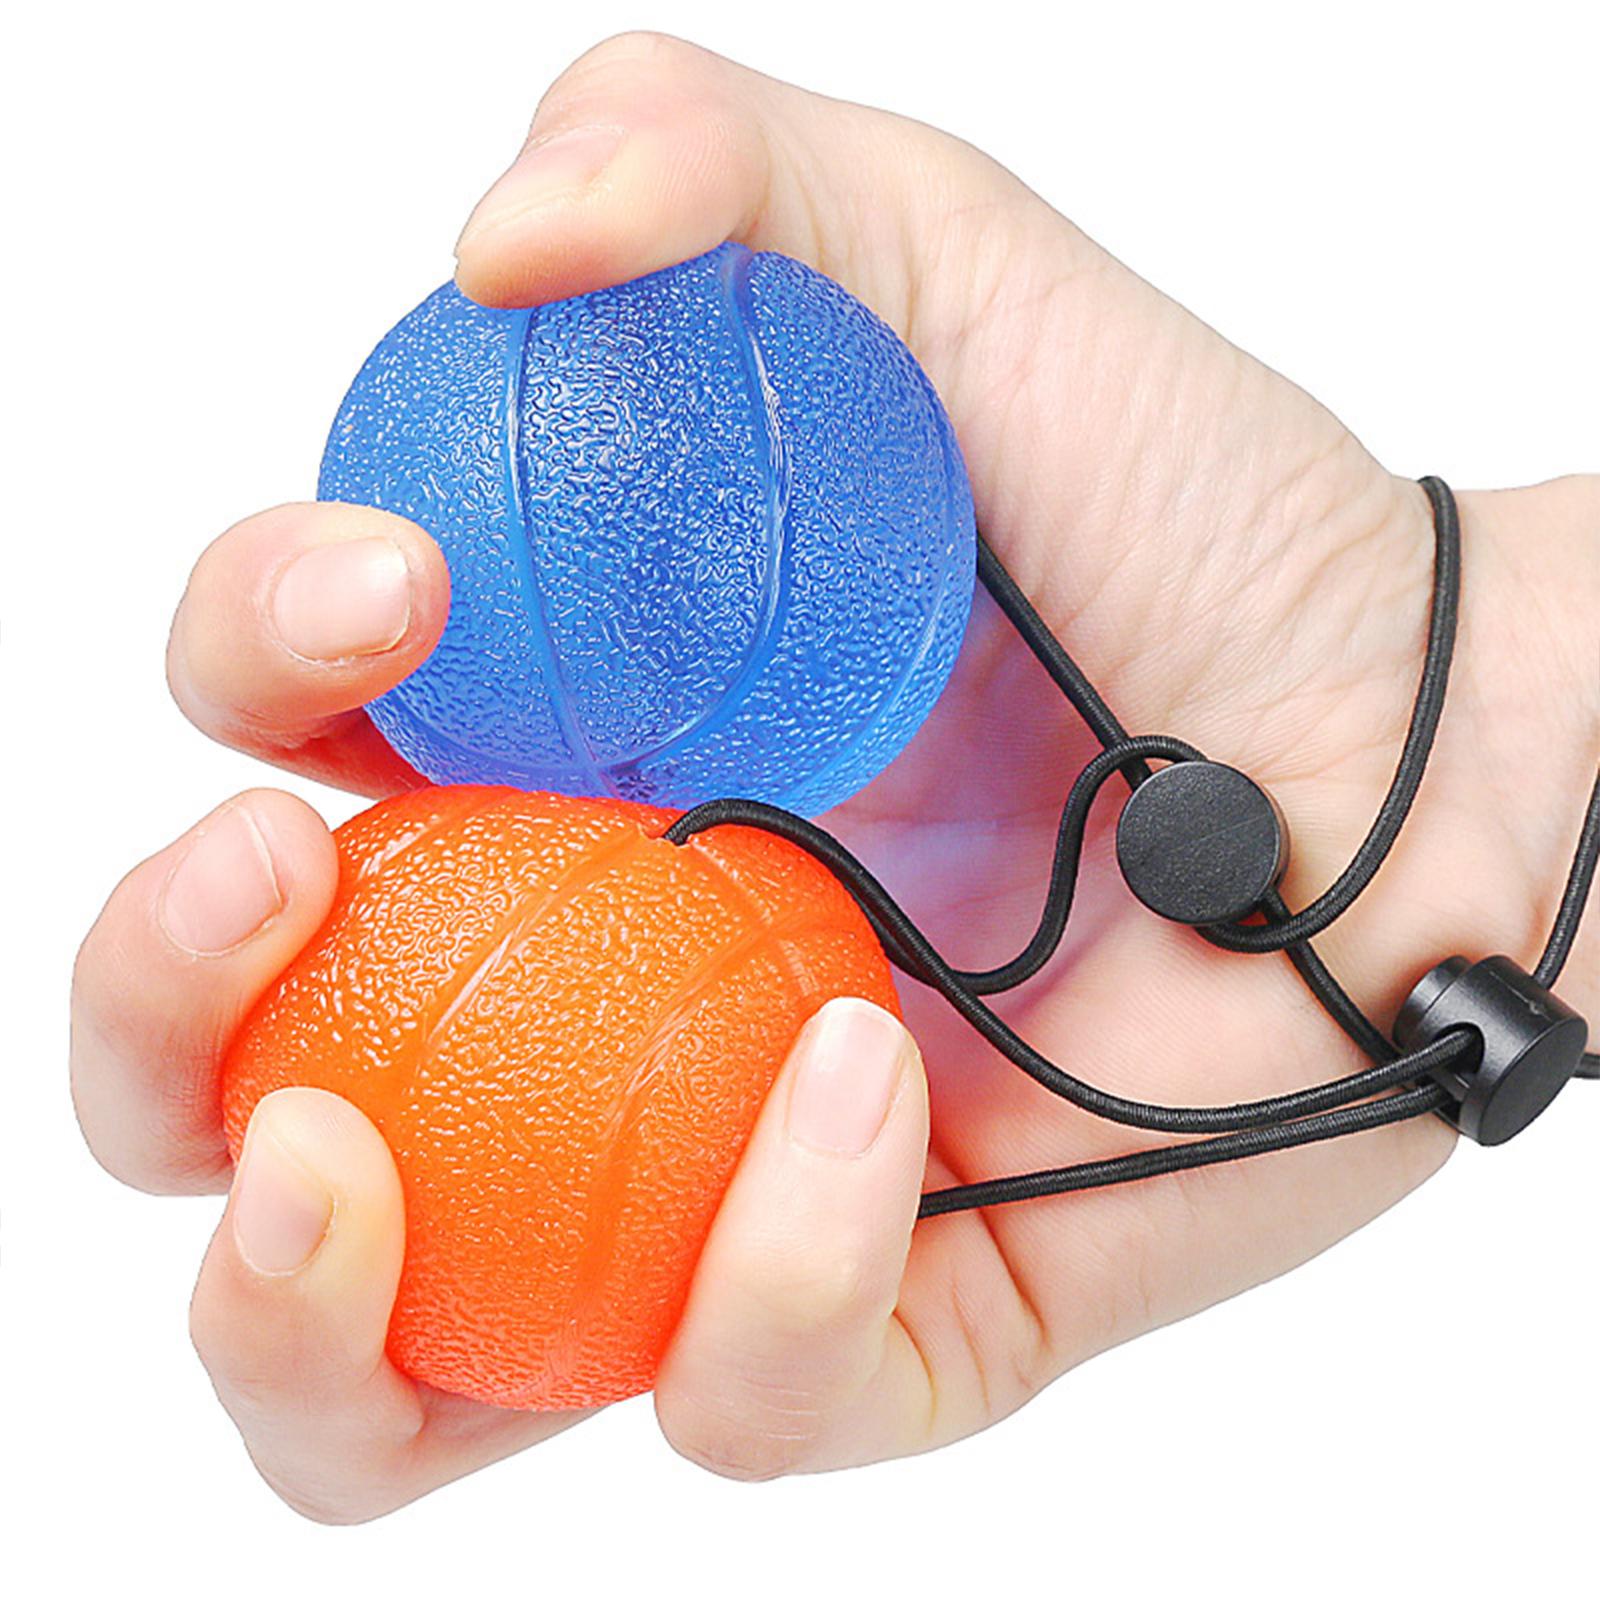 Squeezing Ball Workout Resistance Ball Exercise Squeezer Hand Exercise Balls Yellow 15KG